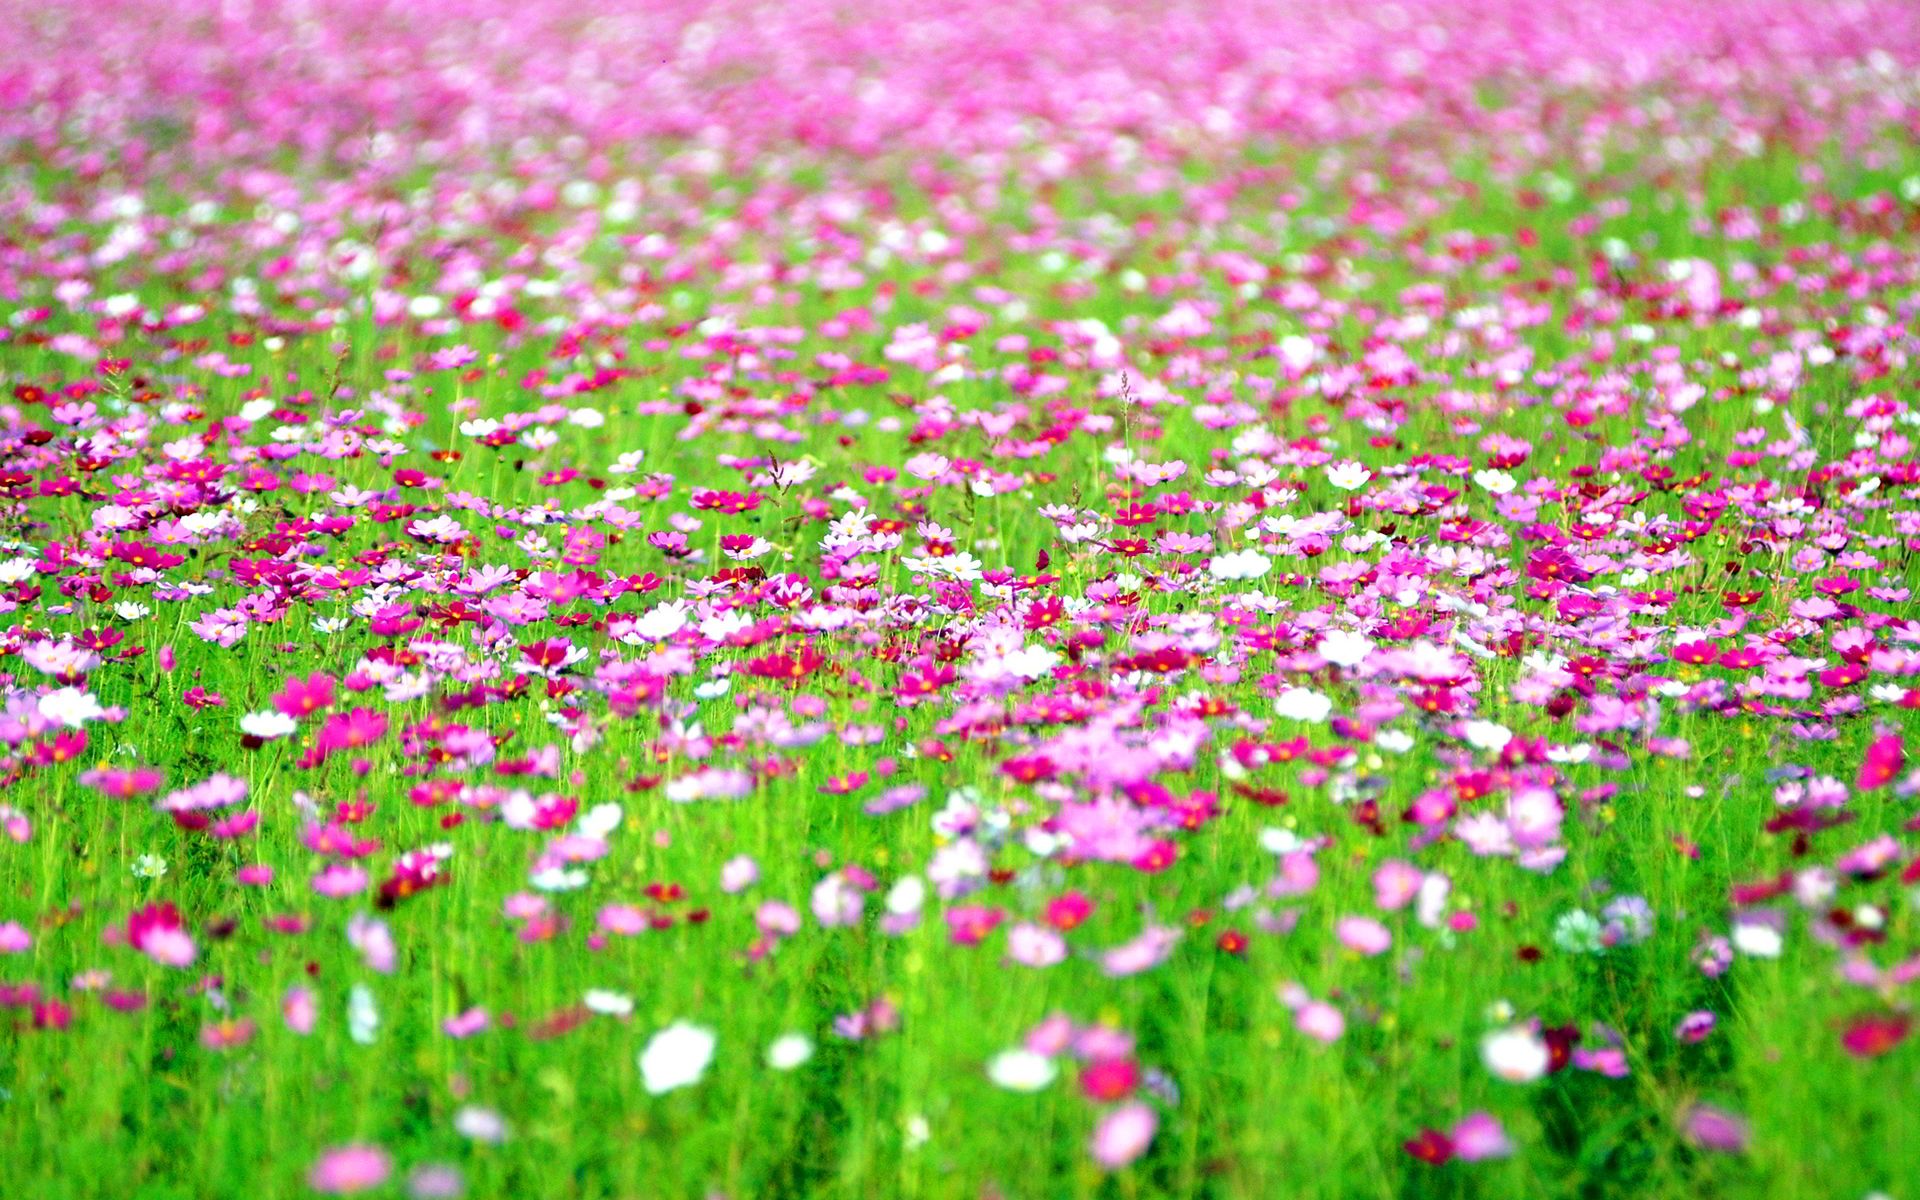 Ultra HD cosmos flowers field HQ Picture. Cosmos flowers, Field wallpaper, Flower field